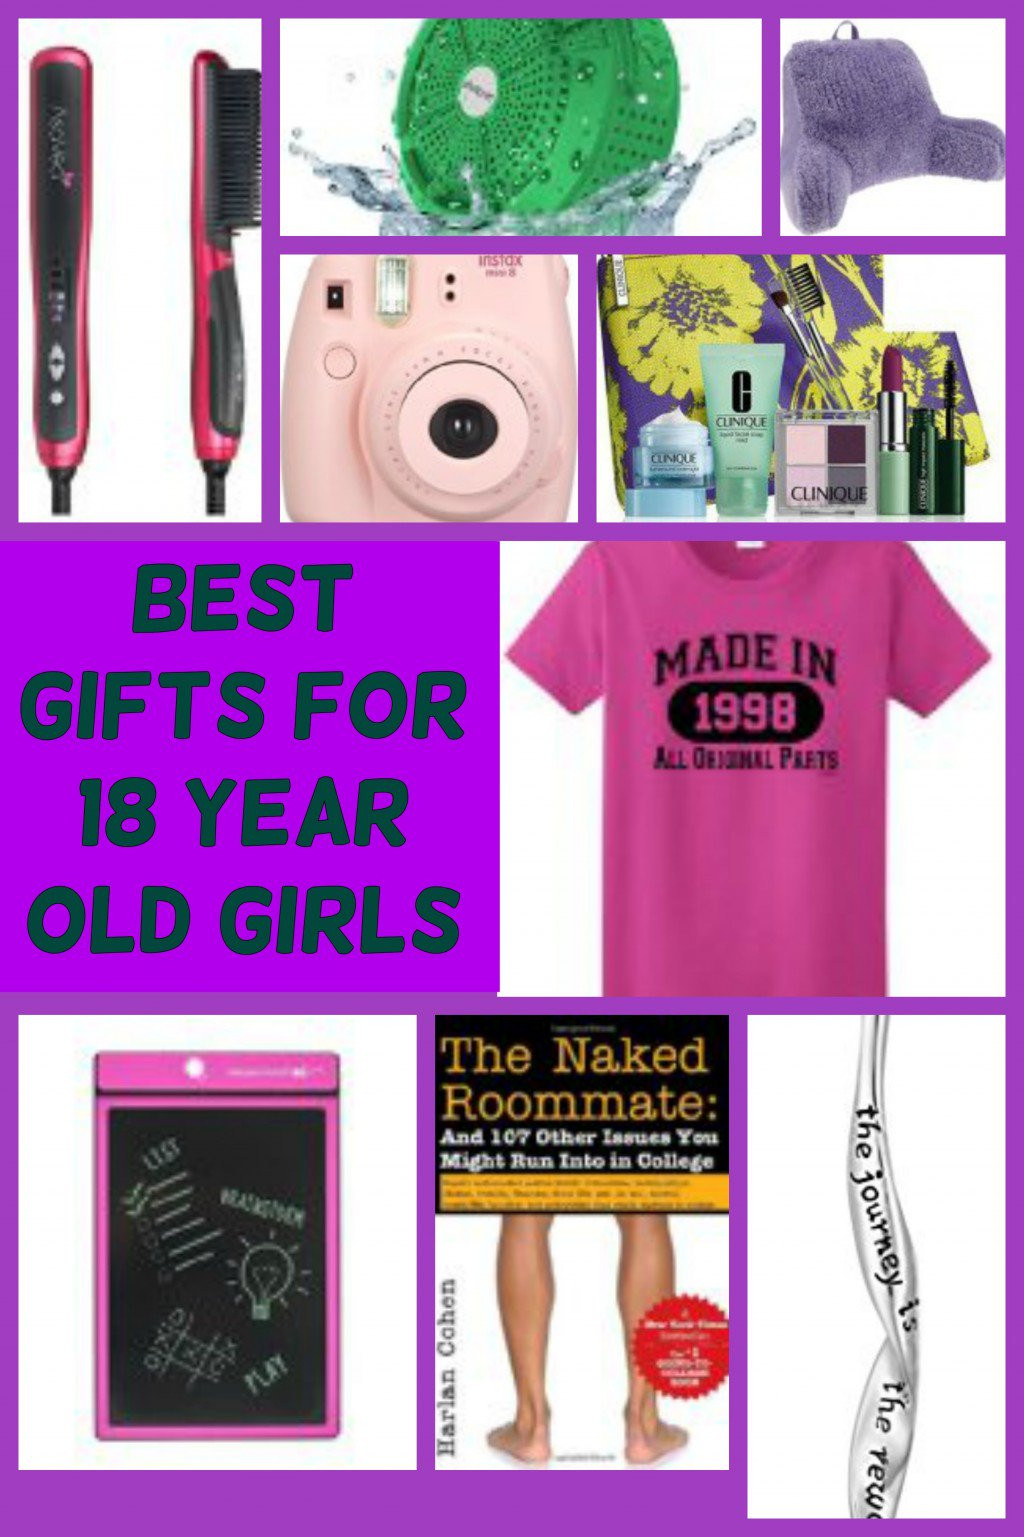 Christmas Gift Ideas For 18 Year Old Boy
 Popular Birthday and Christmas Gift Ideas for 18 Year Old